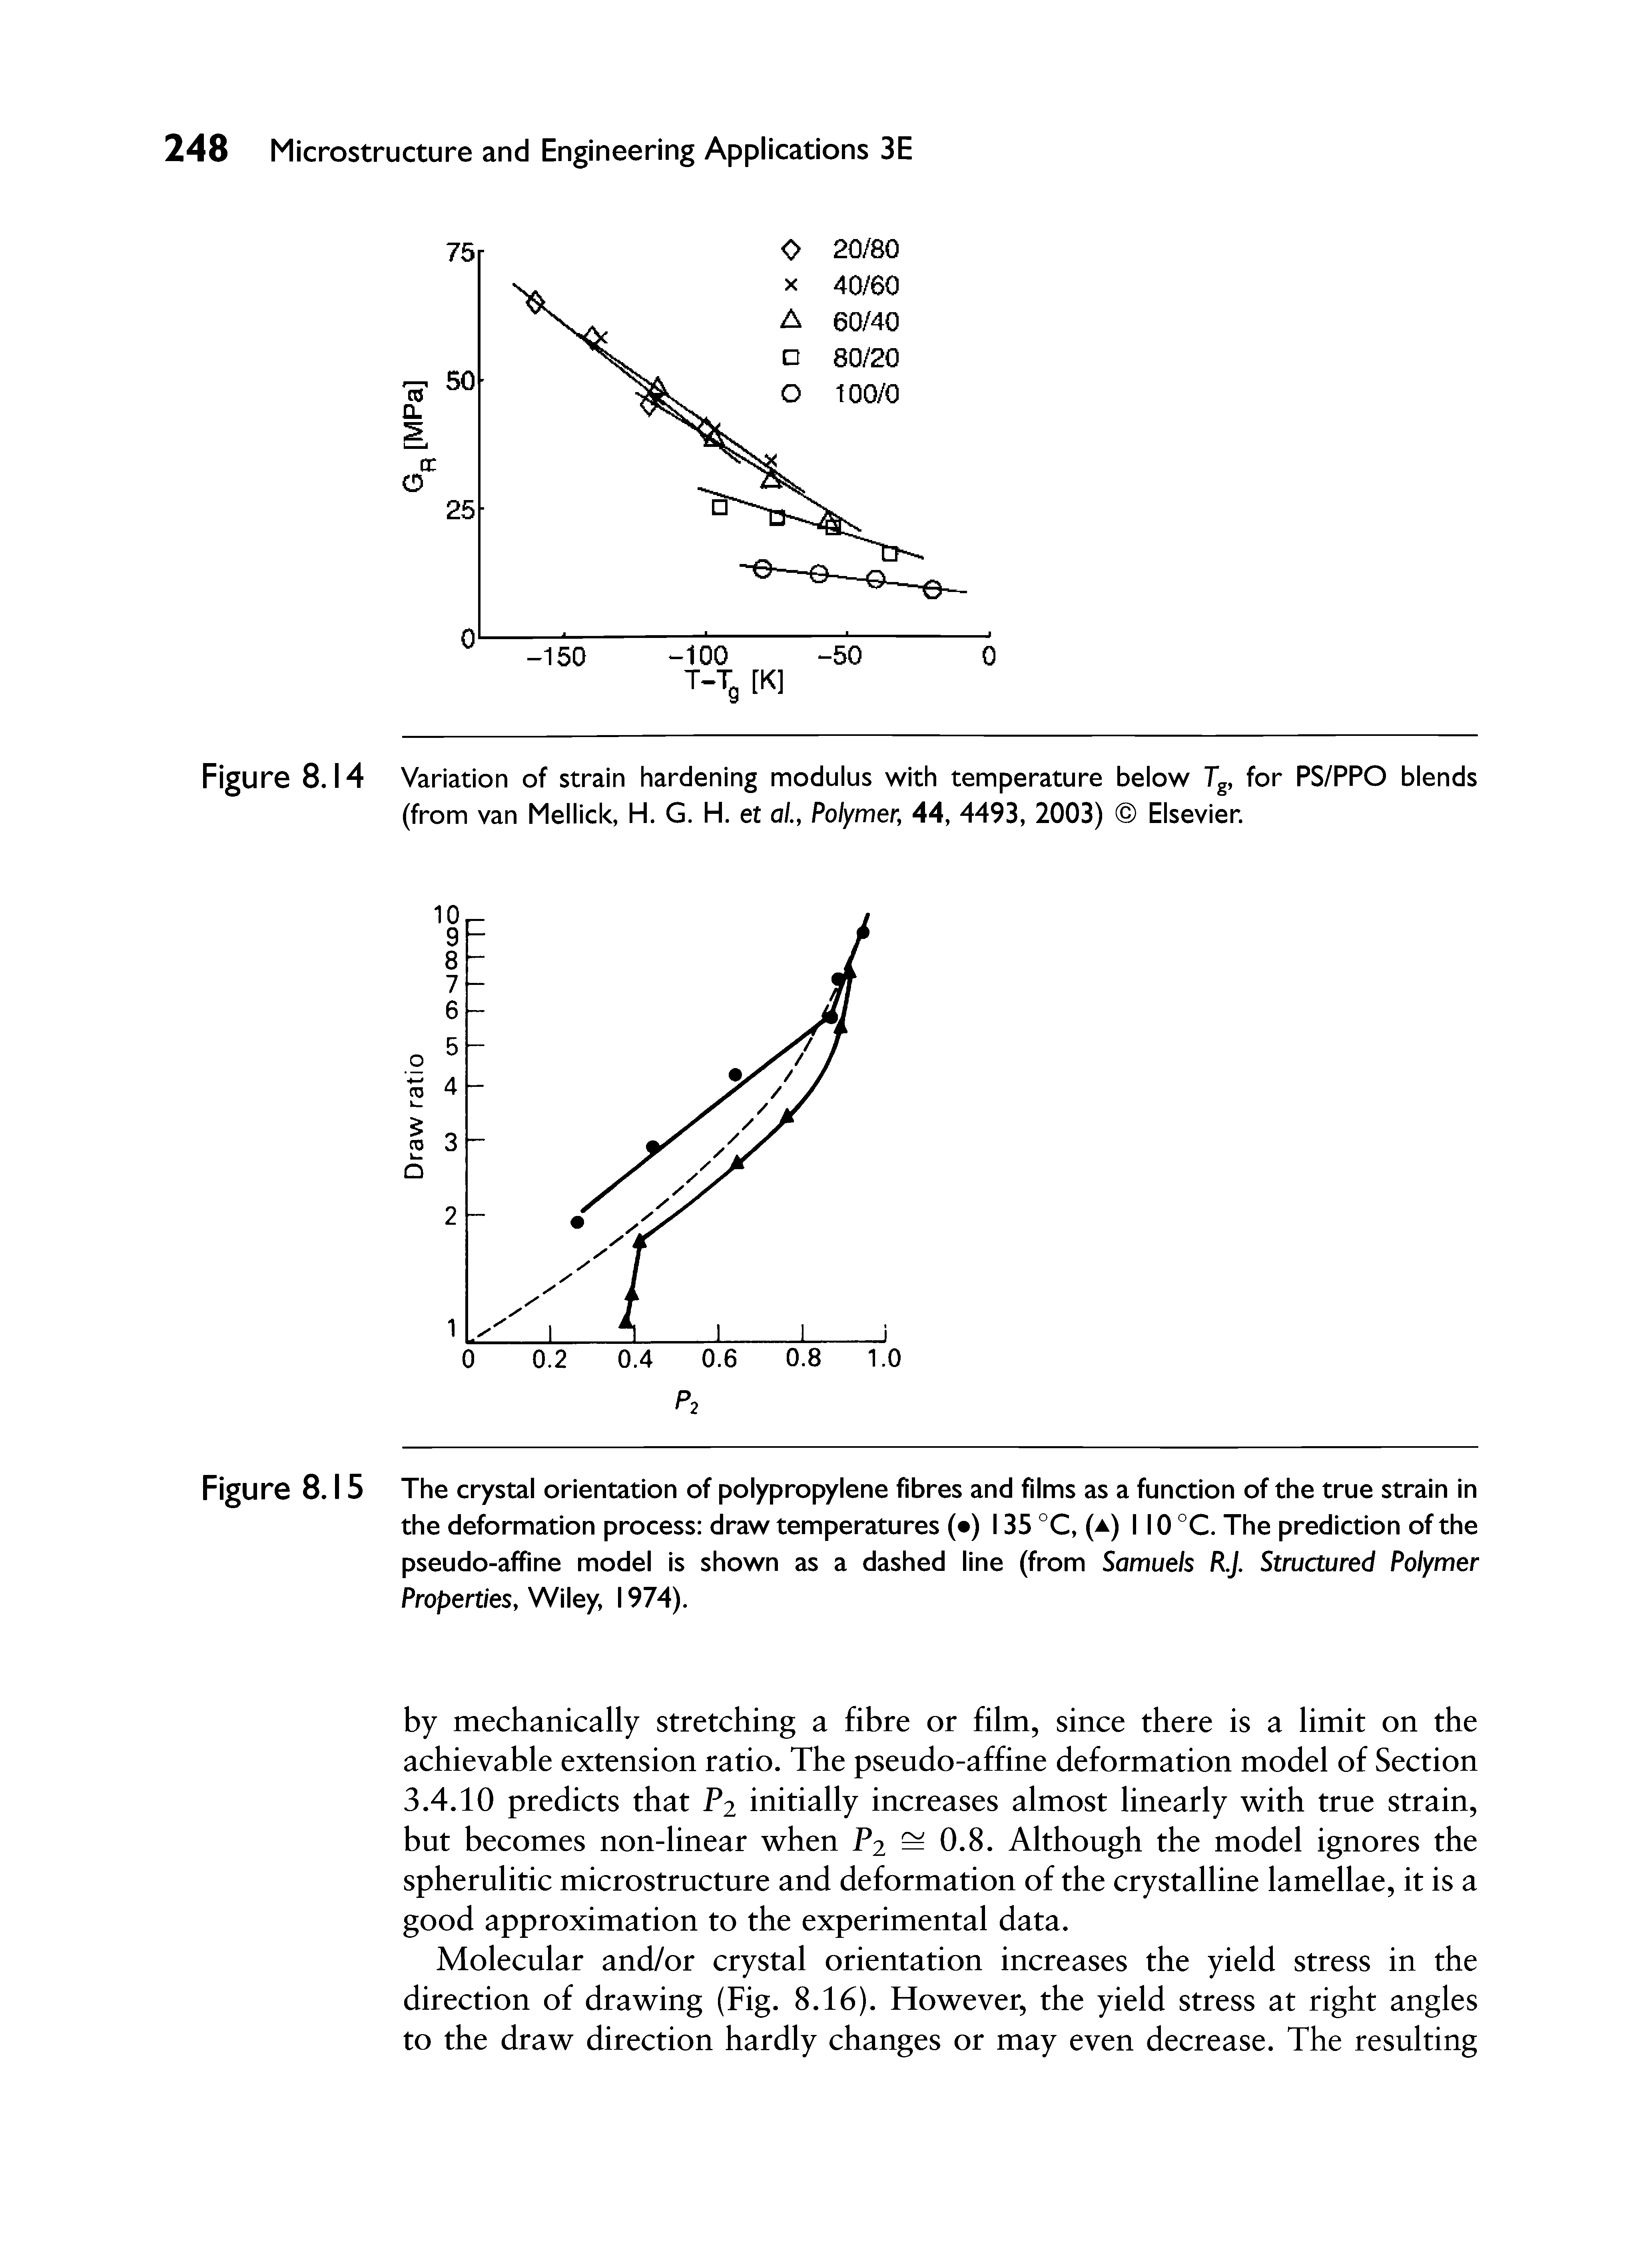 Figure 8.1 5 The crystal orientation of polypropylene fibres and films as a function of the true strain in the deformation process draw temperatures ( ) 135 °C, (a) I 10 °C. The prediction of the pseudo-affine model is shown as a dashed line (from Samuels RJ. Structured Polymer Properties, Wiley, 1974).